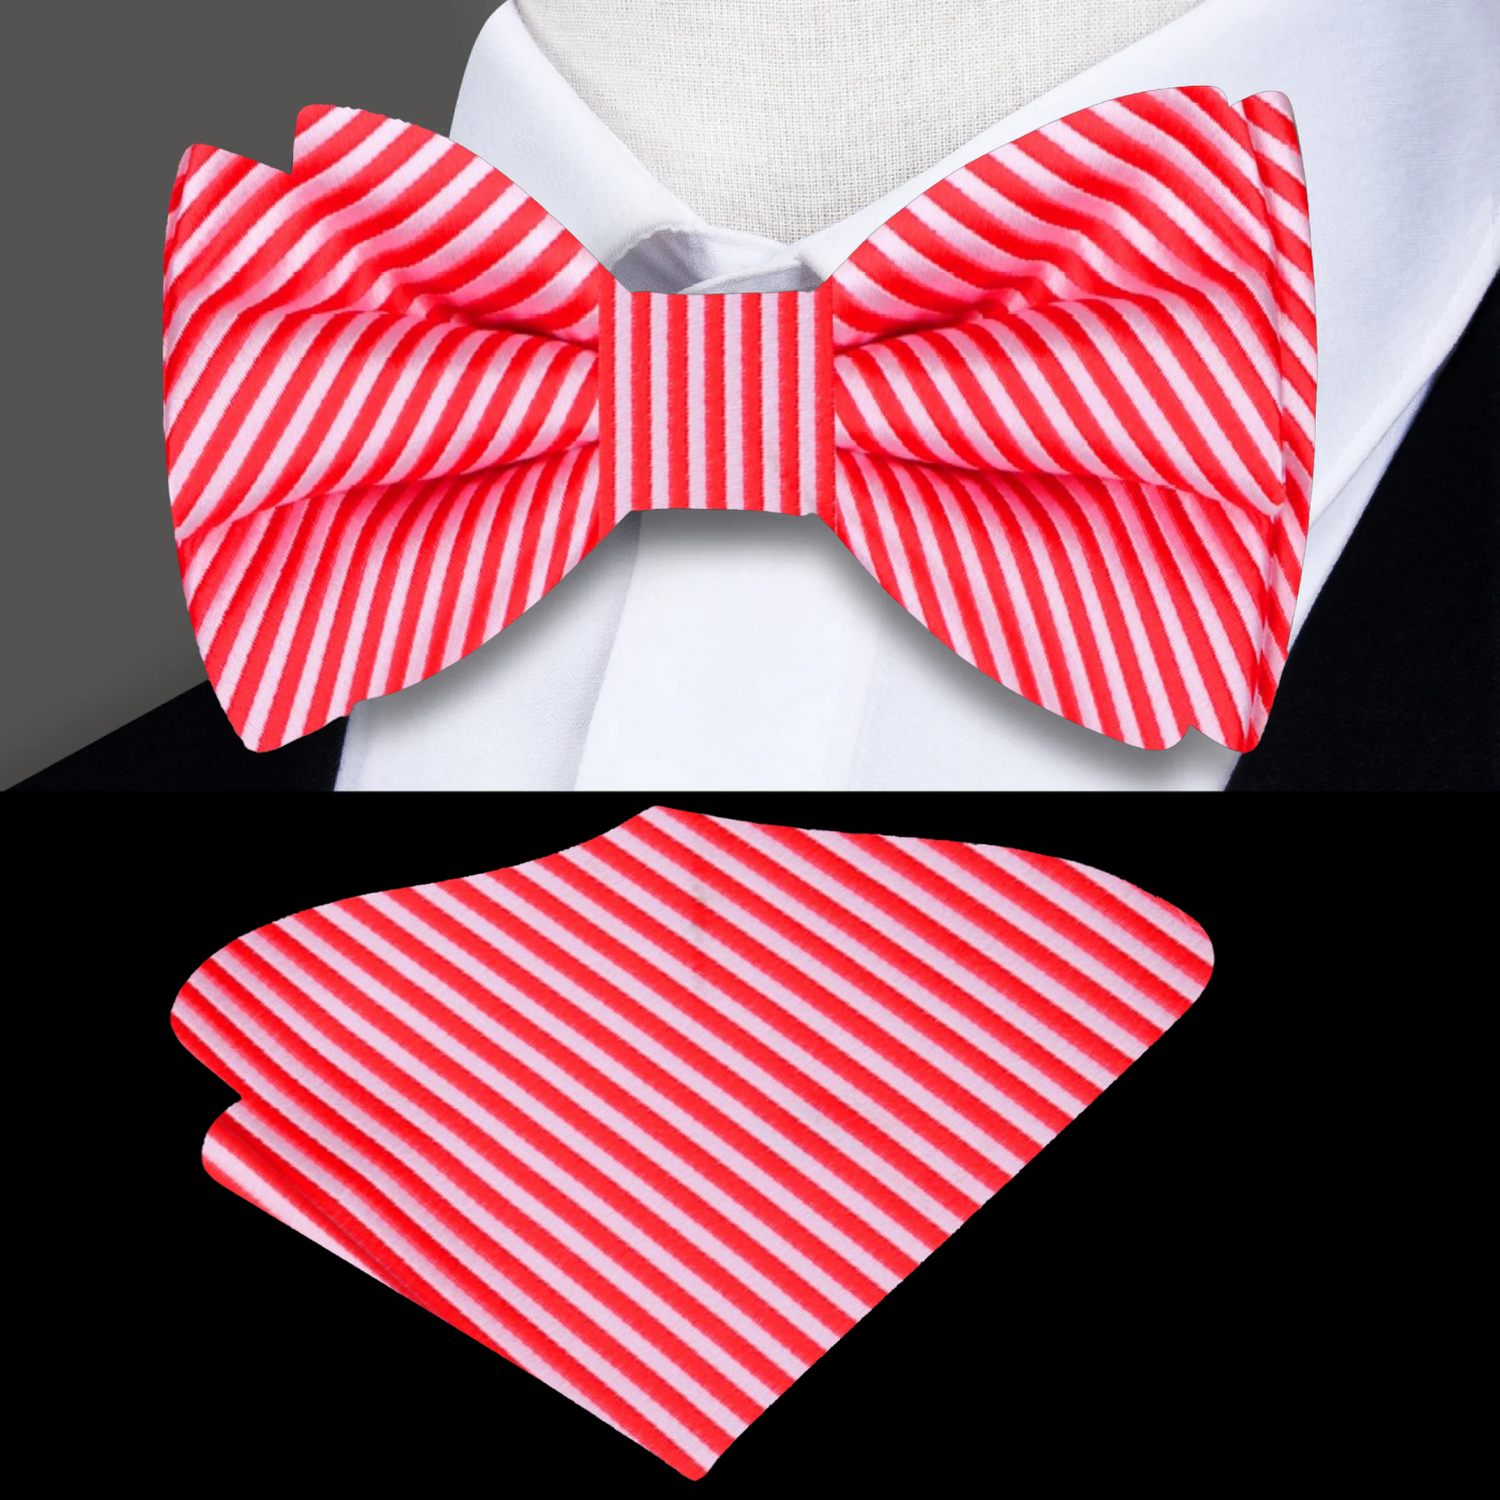 Main: Red, White Pinstripe Bow Tie and Pocket Square